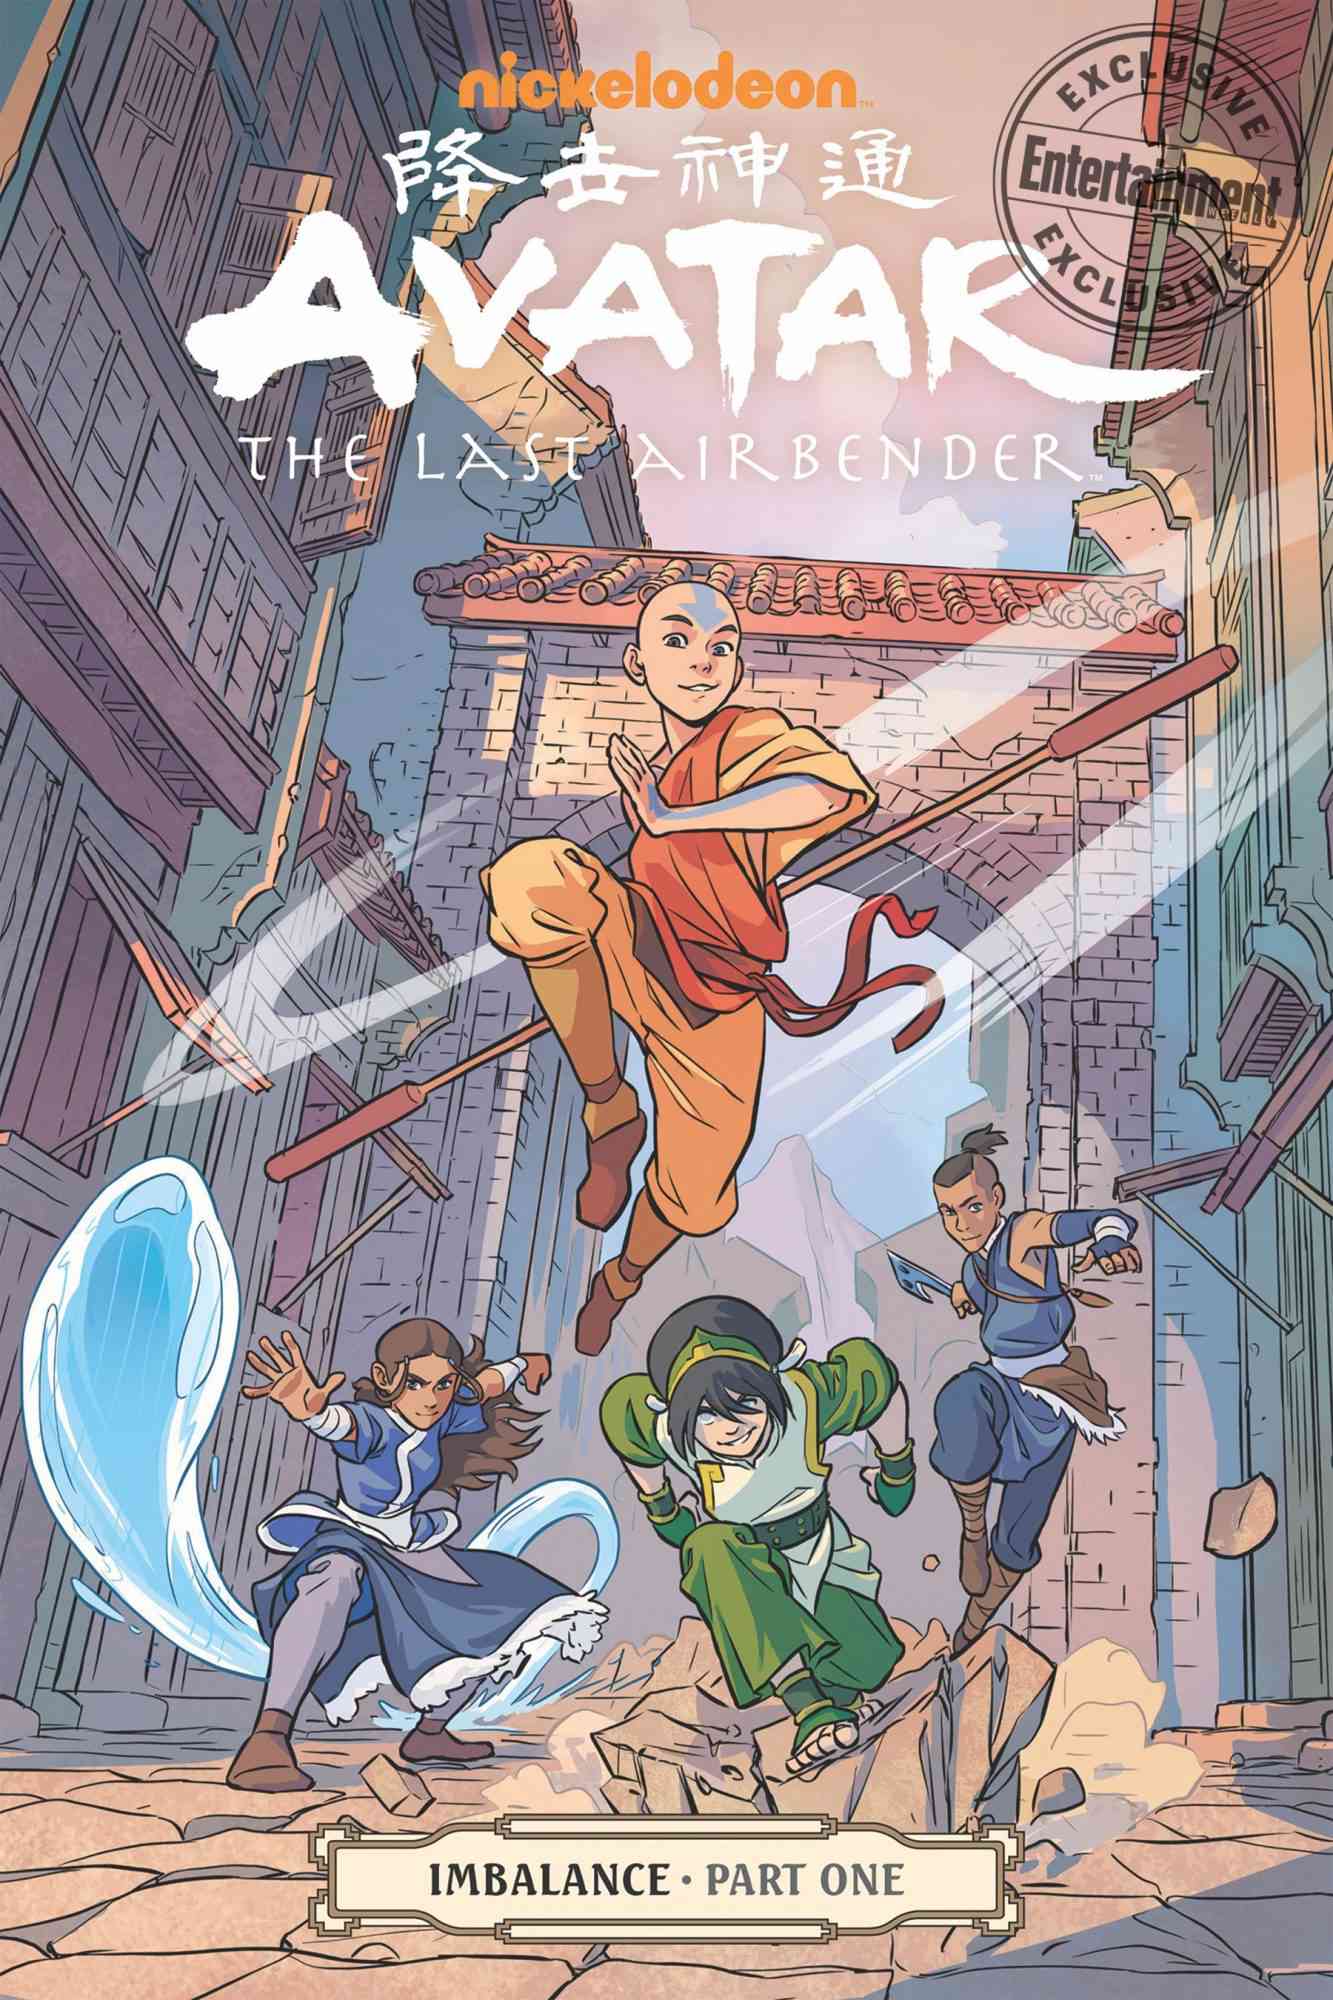 Avatar The Last Airbender The Shadow of Kyoshi Chronicles of the Avatar  Book 2 Ebook  ABRAMS